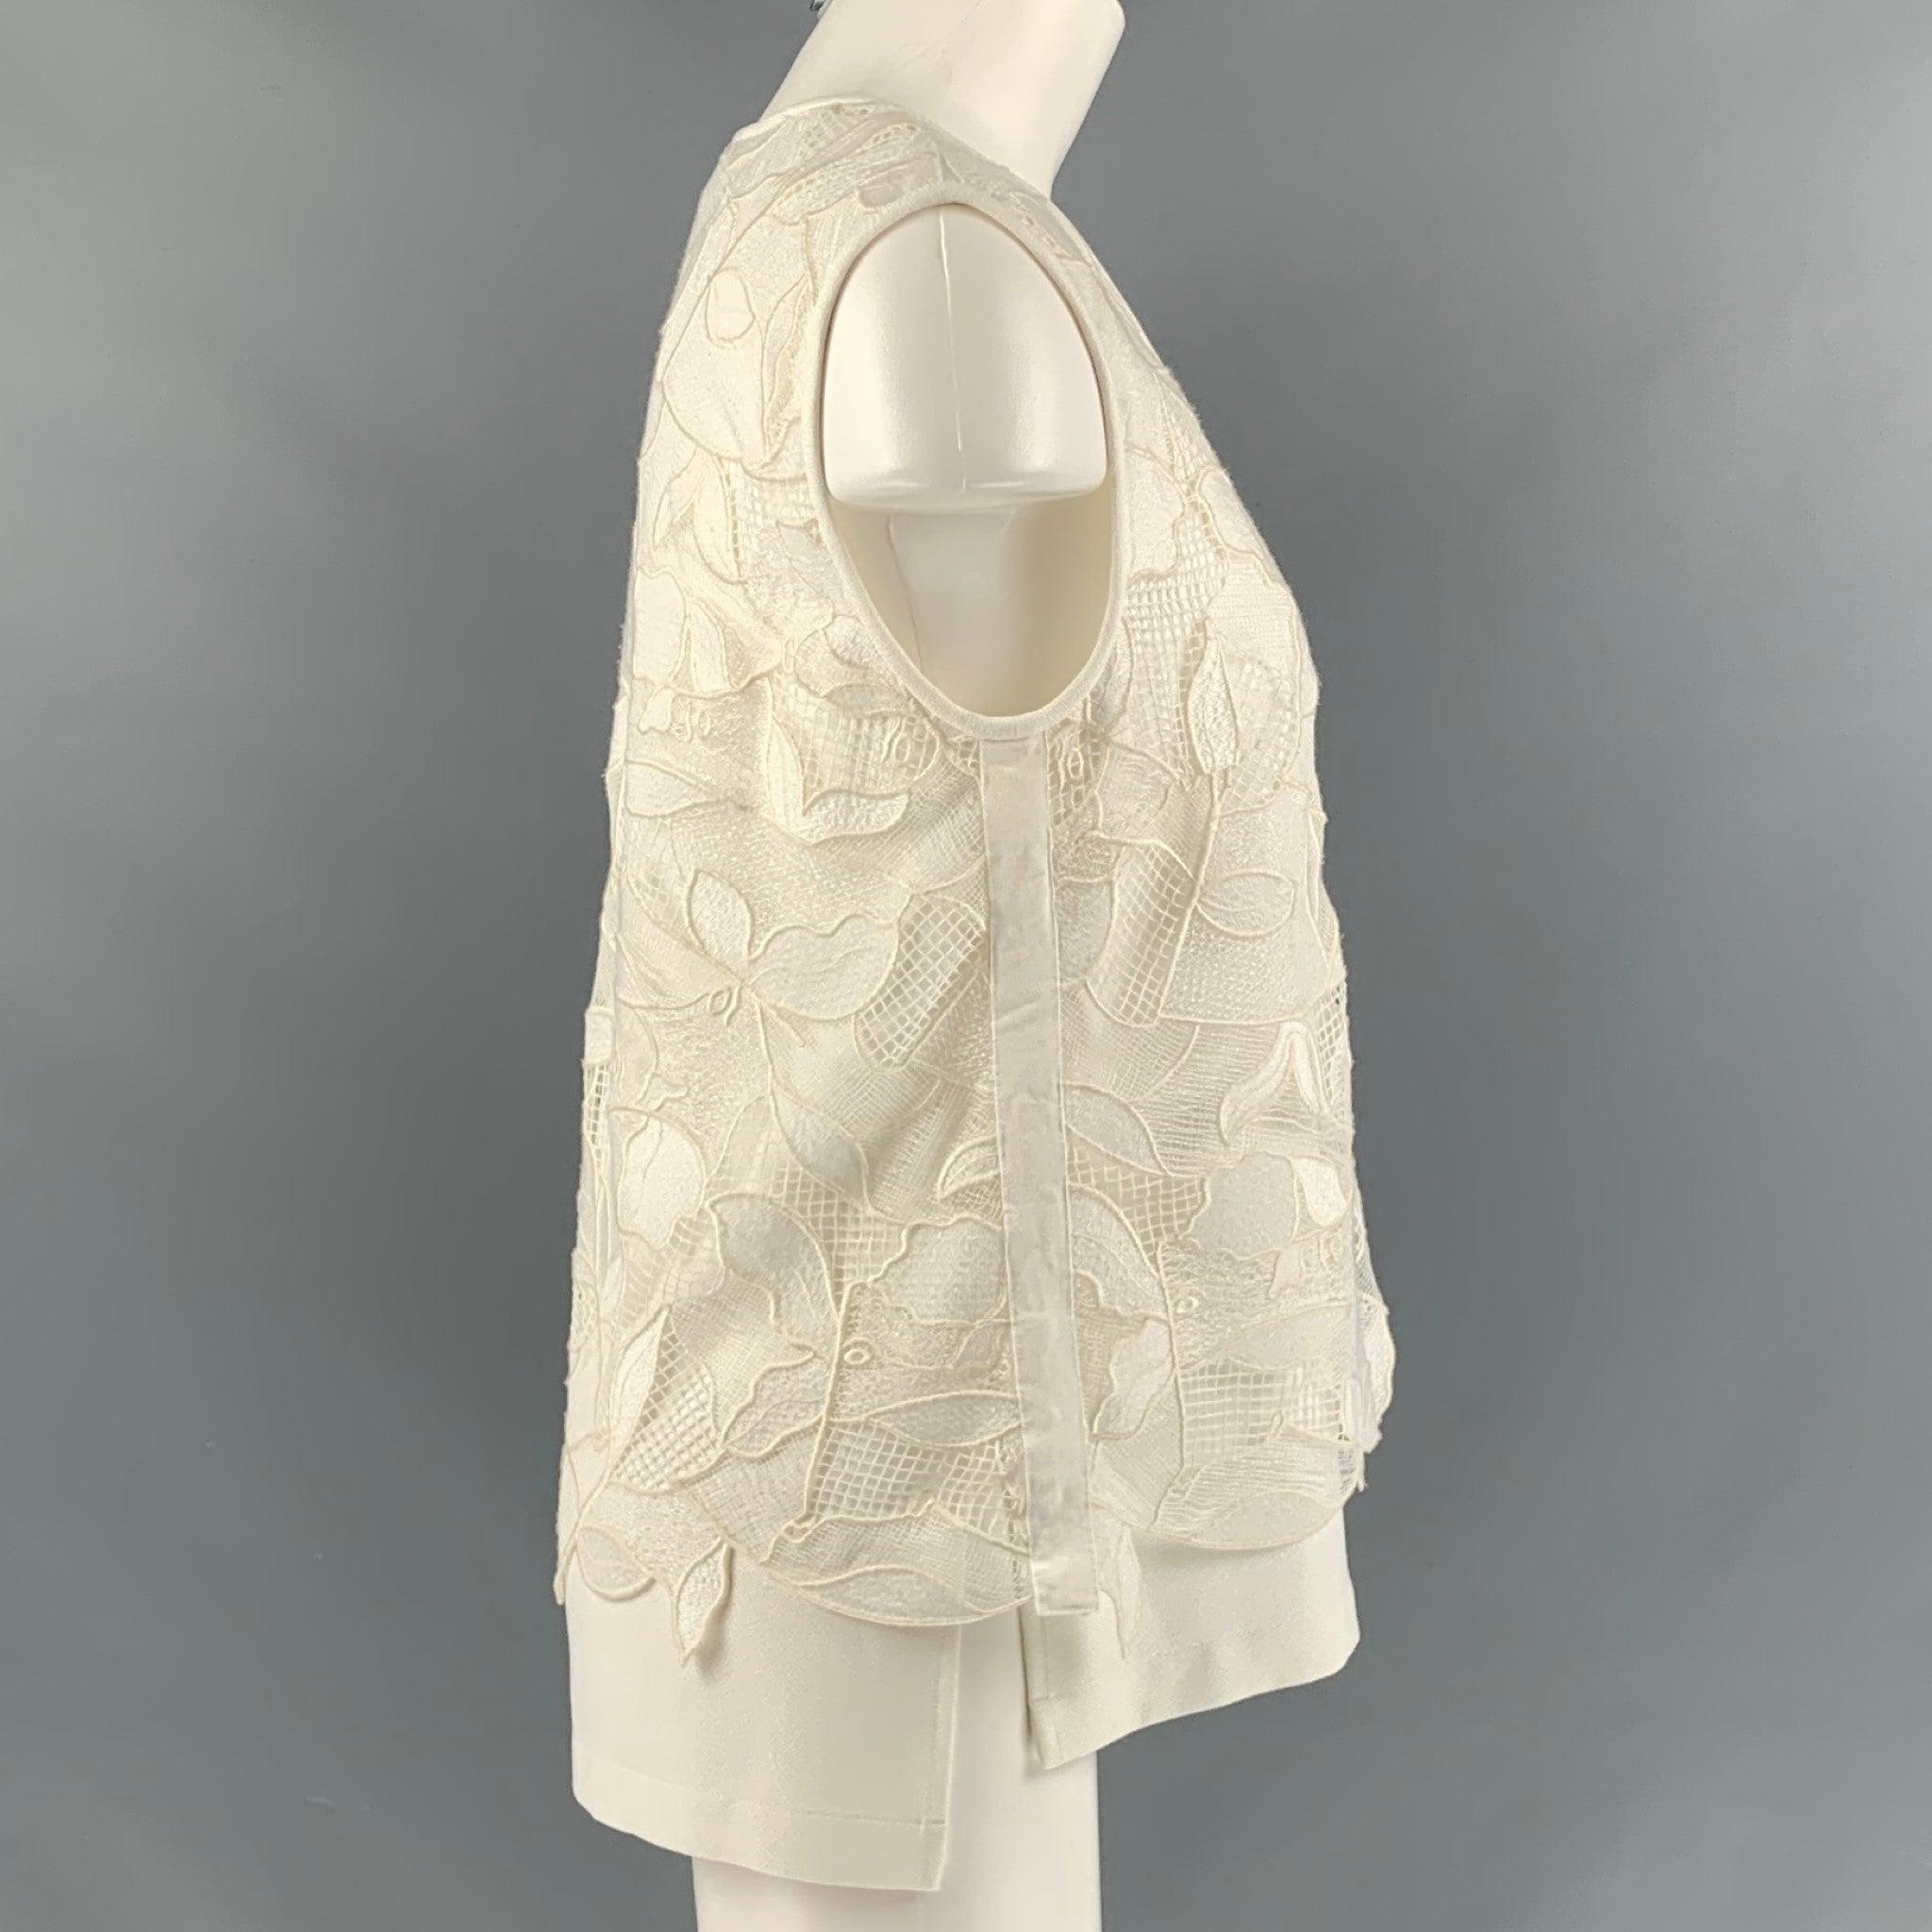 JASON WU 'GREY by' lose fit, sleeveless, U shape neck blouse comes in white lace print polyester fabric.Excellent Pre-Owned Condition. 
 

 Marked:  4 
 

 Measurements: 
  
 Shoulder: 16 inches Bust: 18.5 inches Length: 25 inches 
 

  
  
  
 Sui